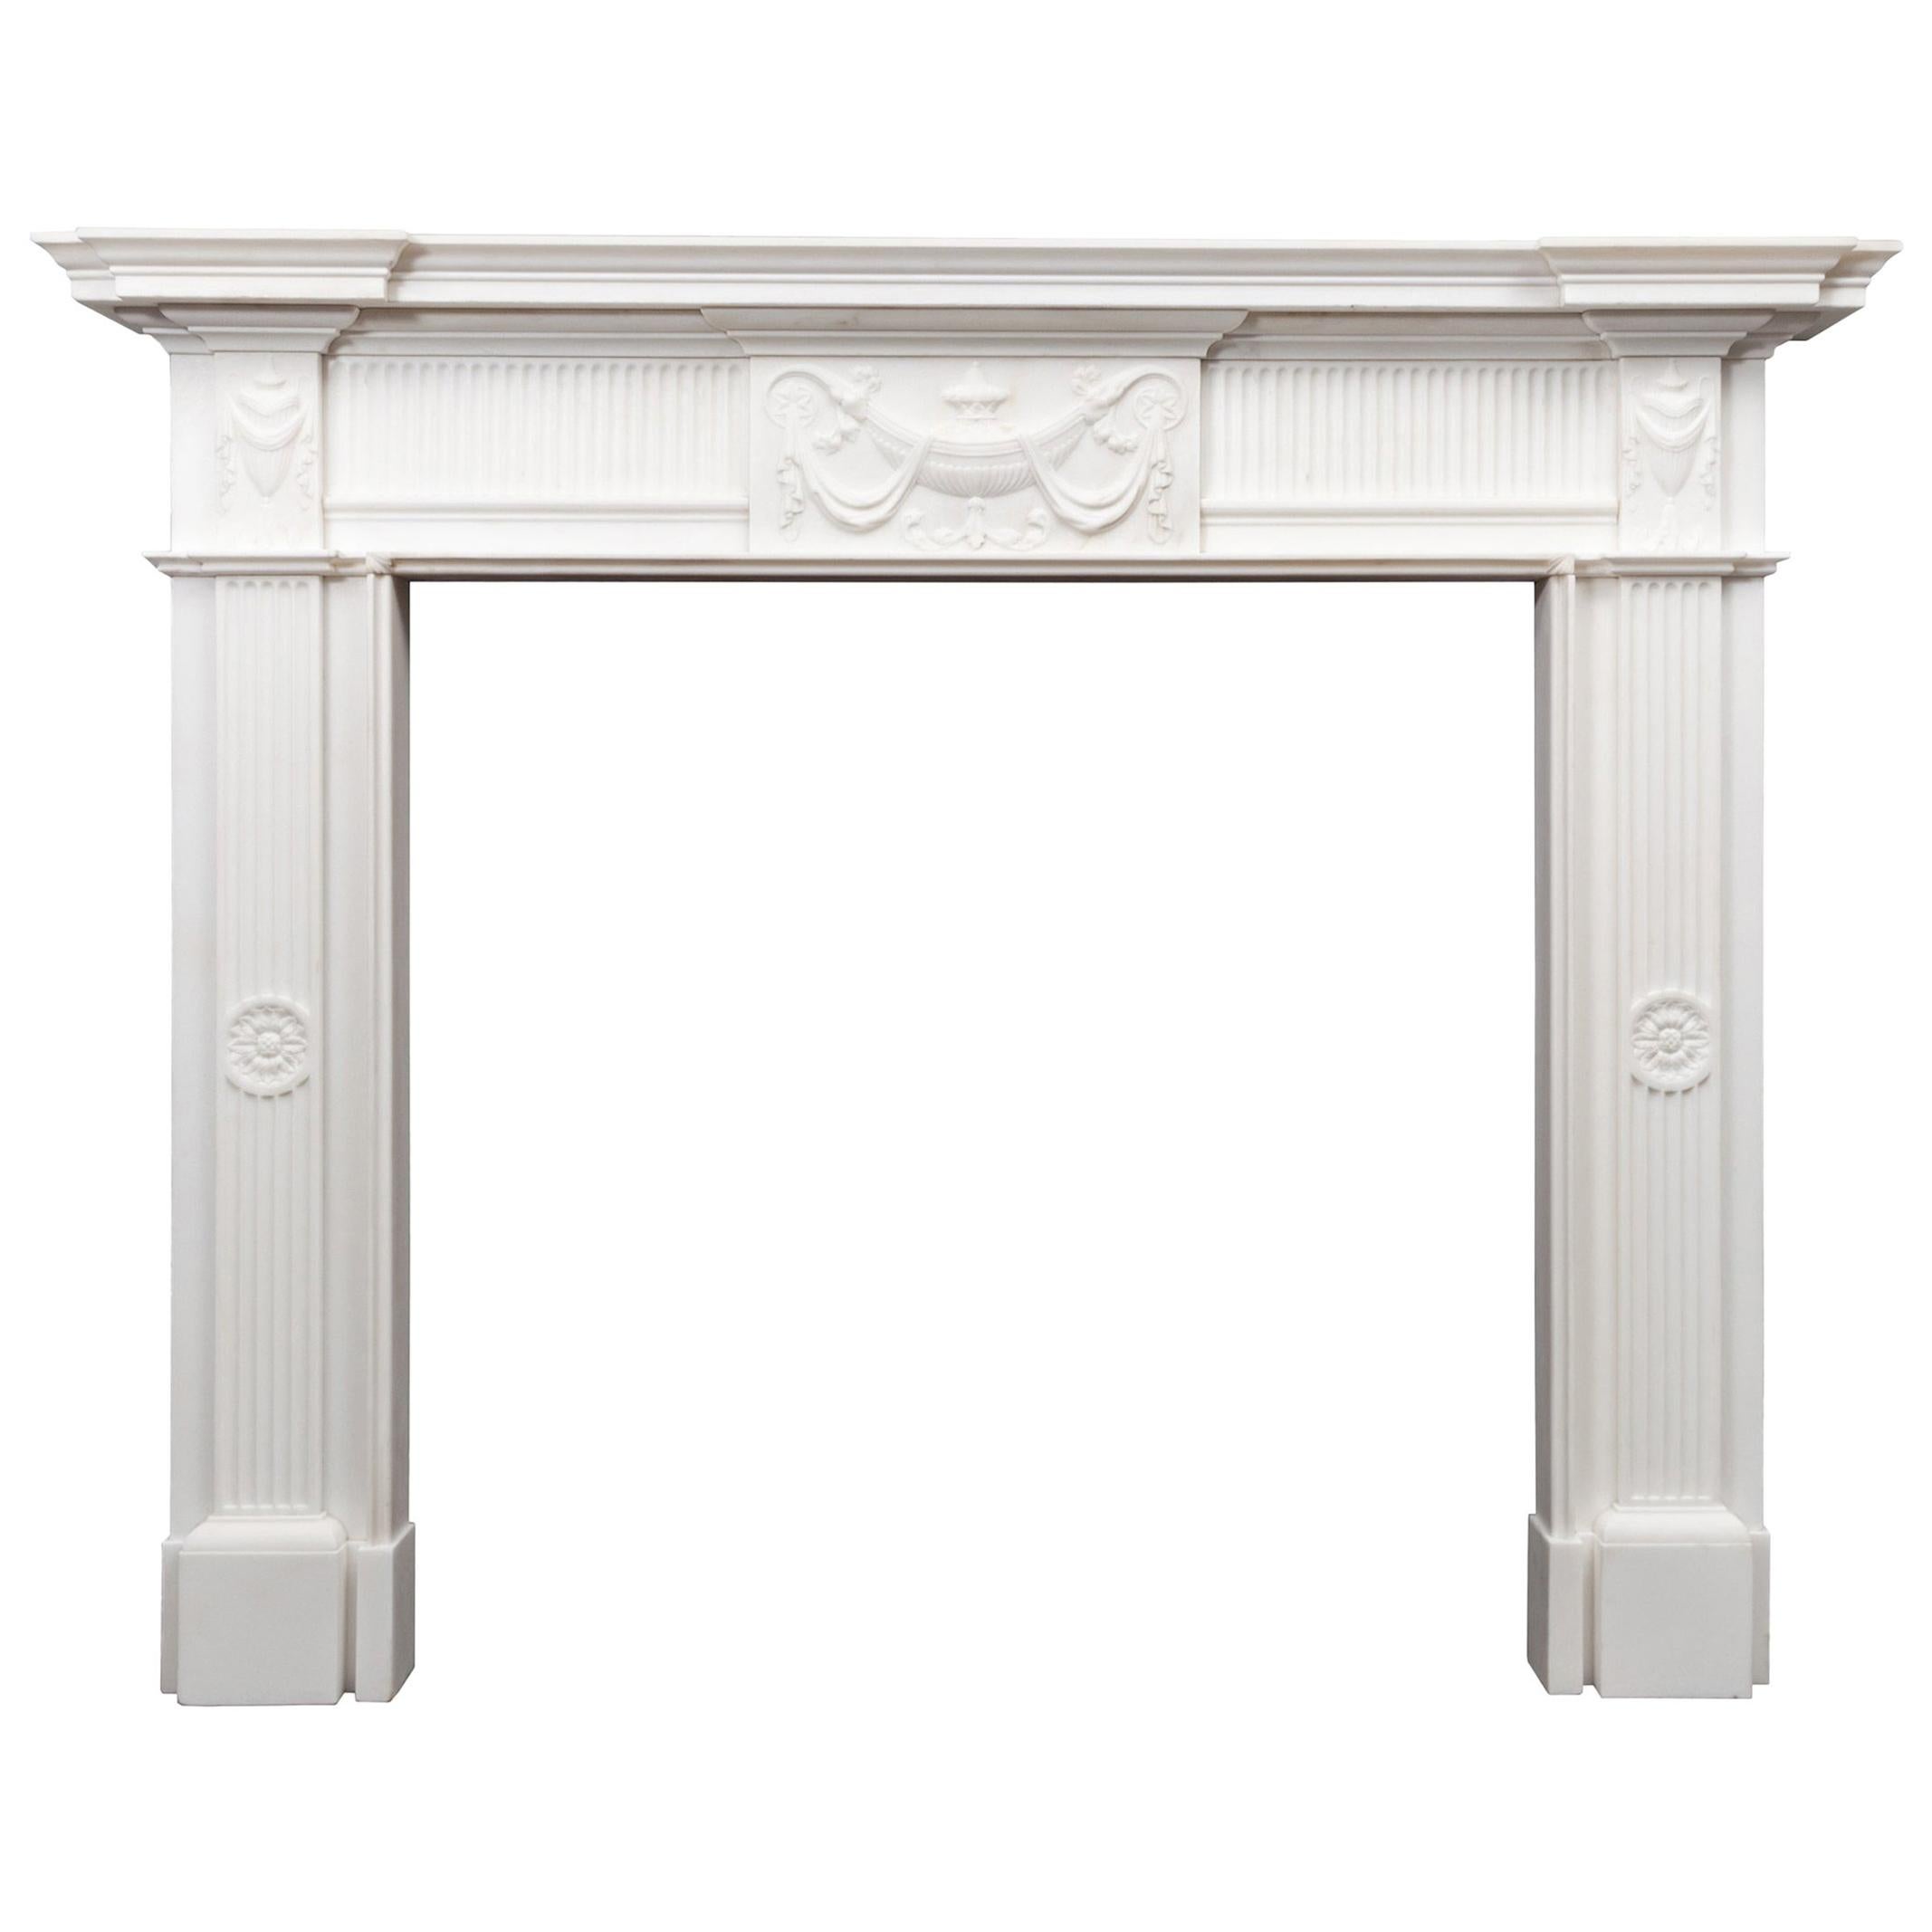 Georgian Style Marble Fireplace by Ryan & Smith For Sale